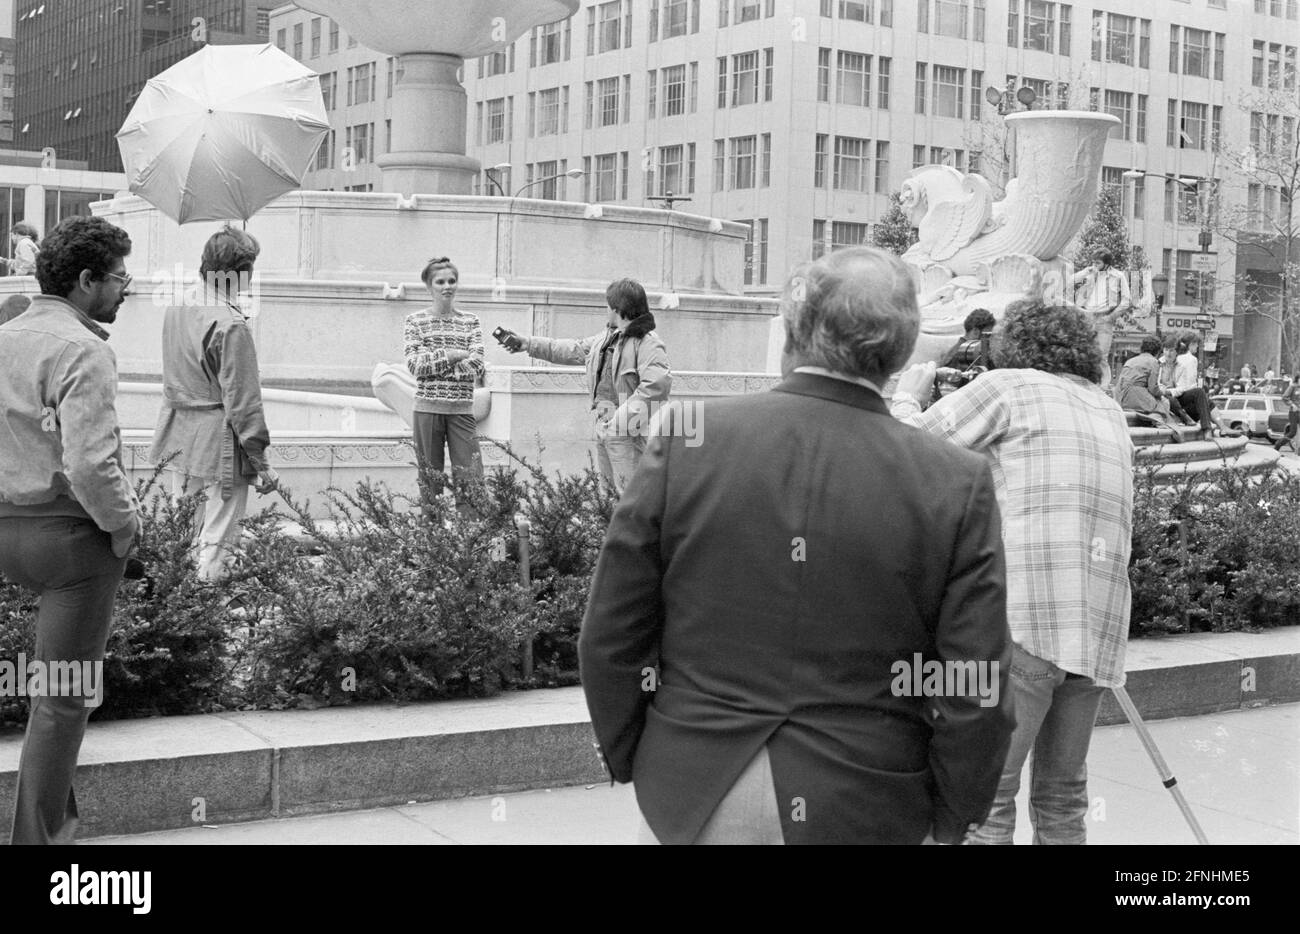 New York City Photo Essay, April 30, 1981- Fashion photography photo shoot with model, photographer, assistants and onlookers. Pulitzer fountain, Grand Army Plaza, Manhattan. Stock Photo